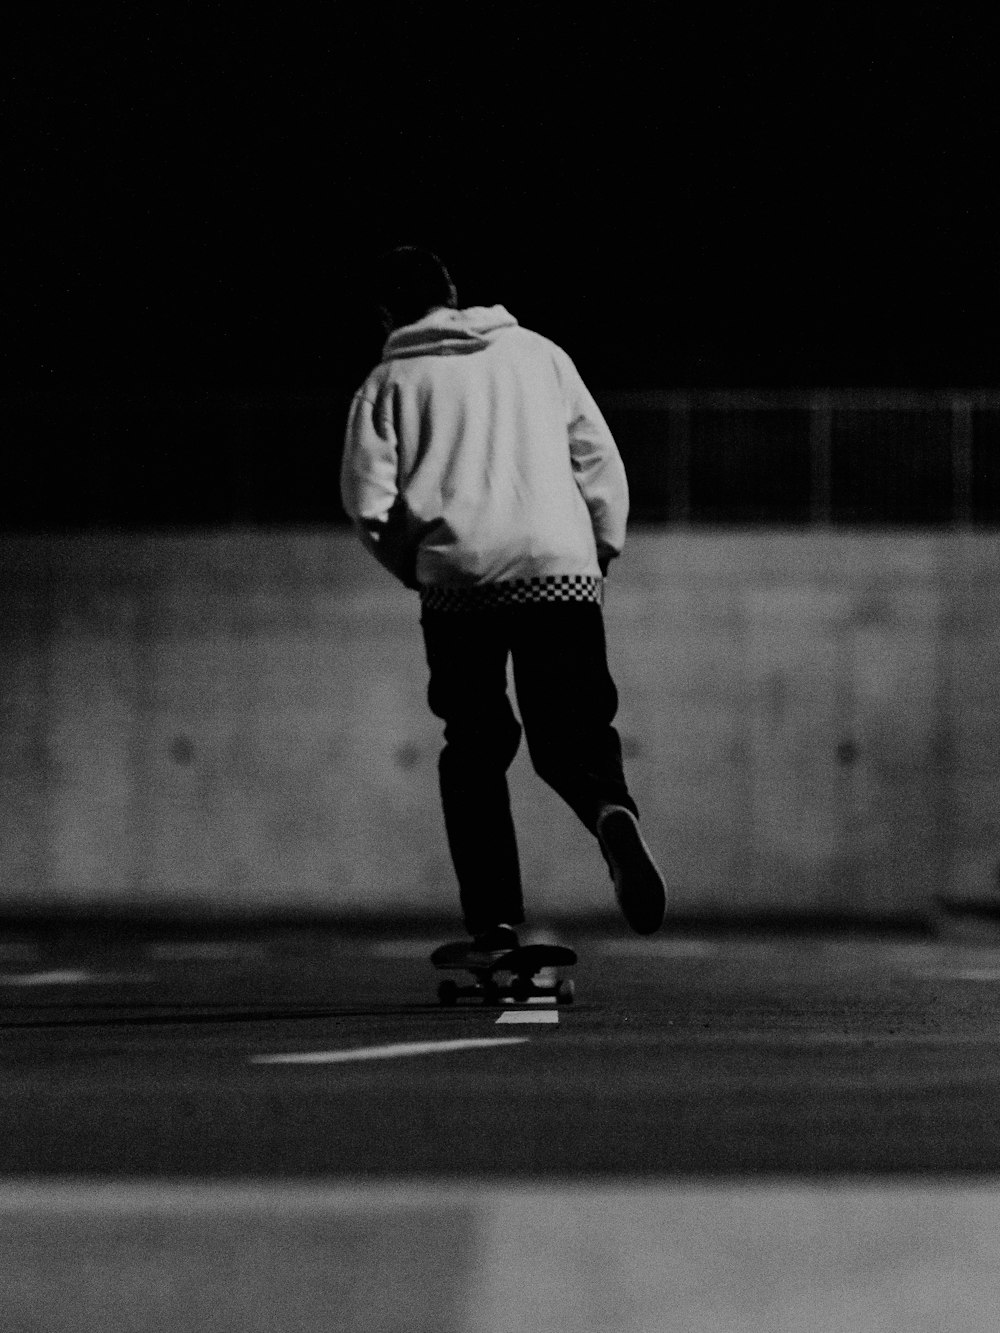 a black and white photo of a man riding a skateboard